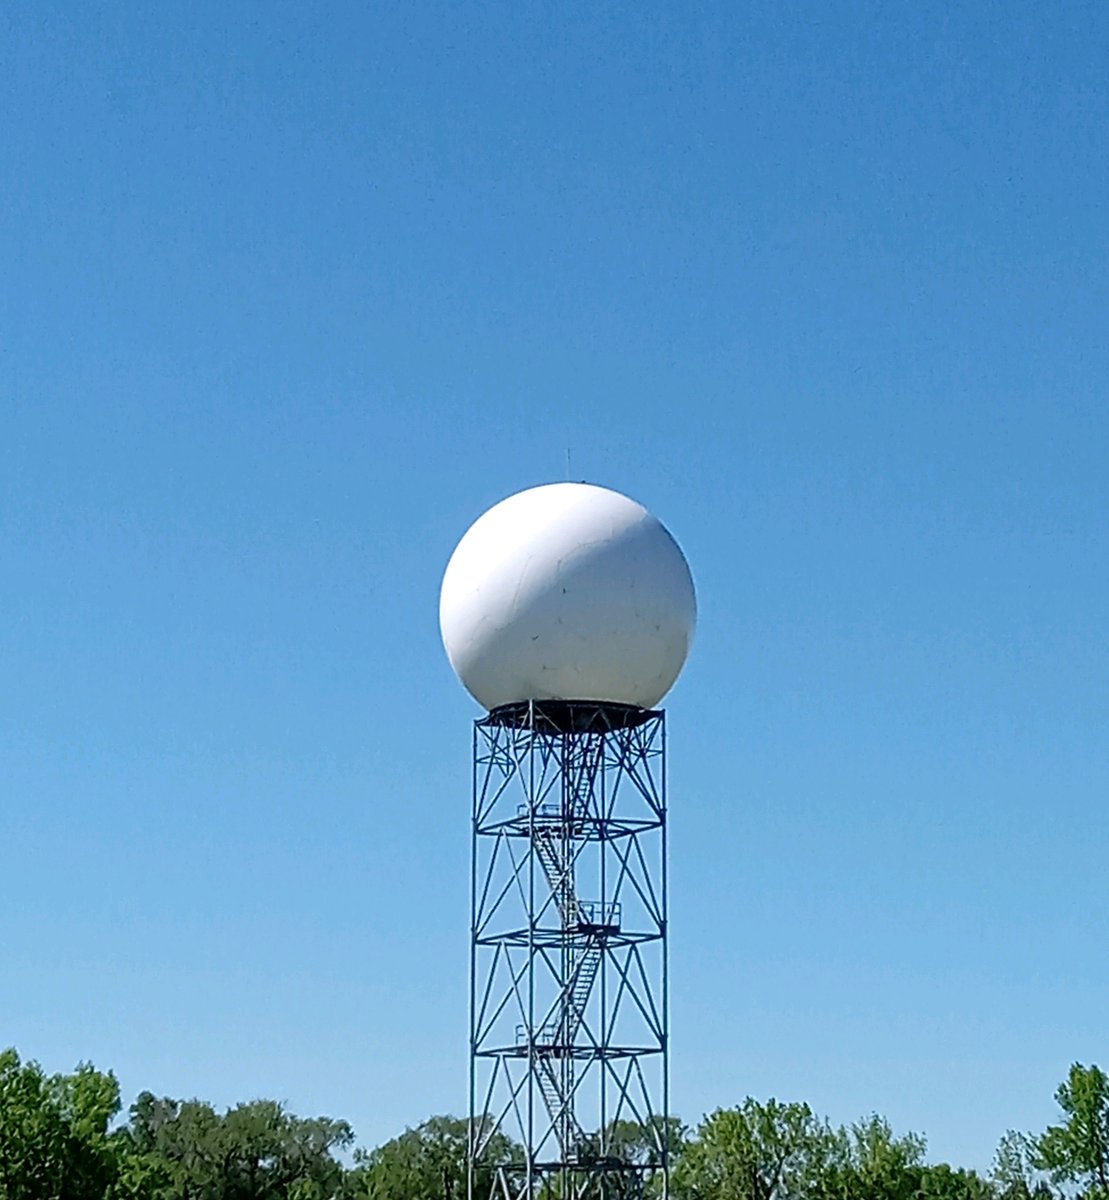 Happy first day of meteorological summer! We're enjoying the clear blue sky this morning at WFO Bismarck. How are you spending the day? #NDwx